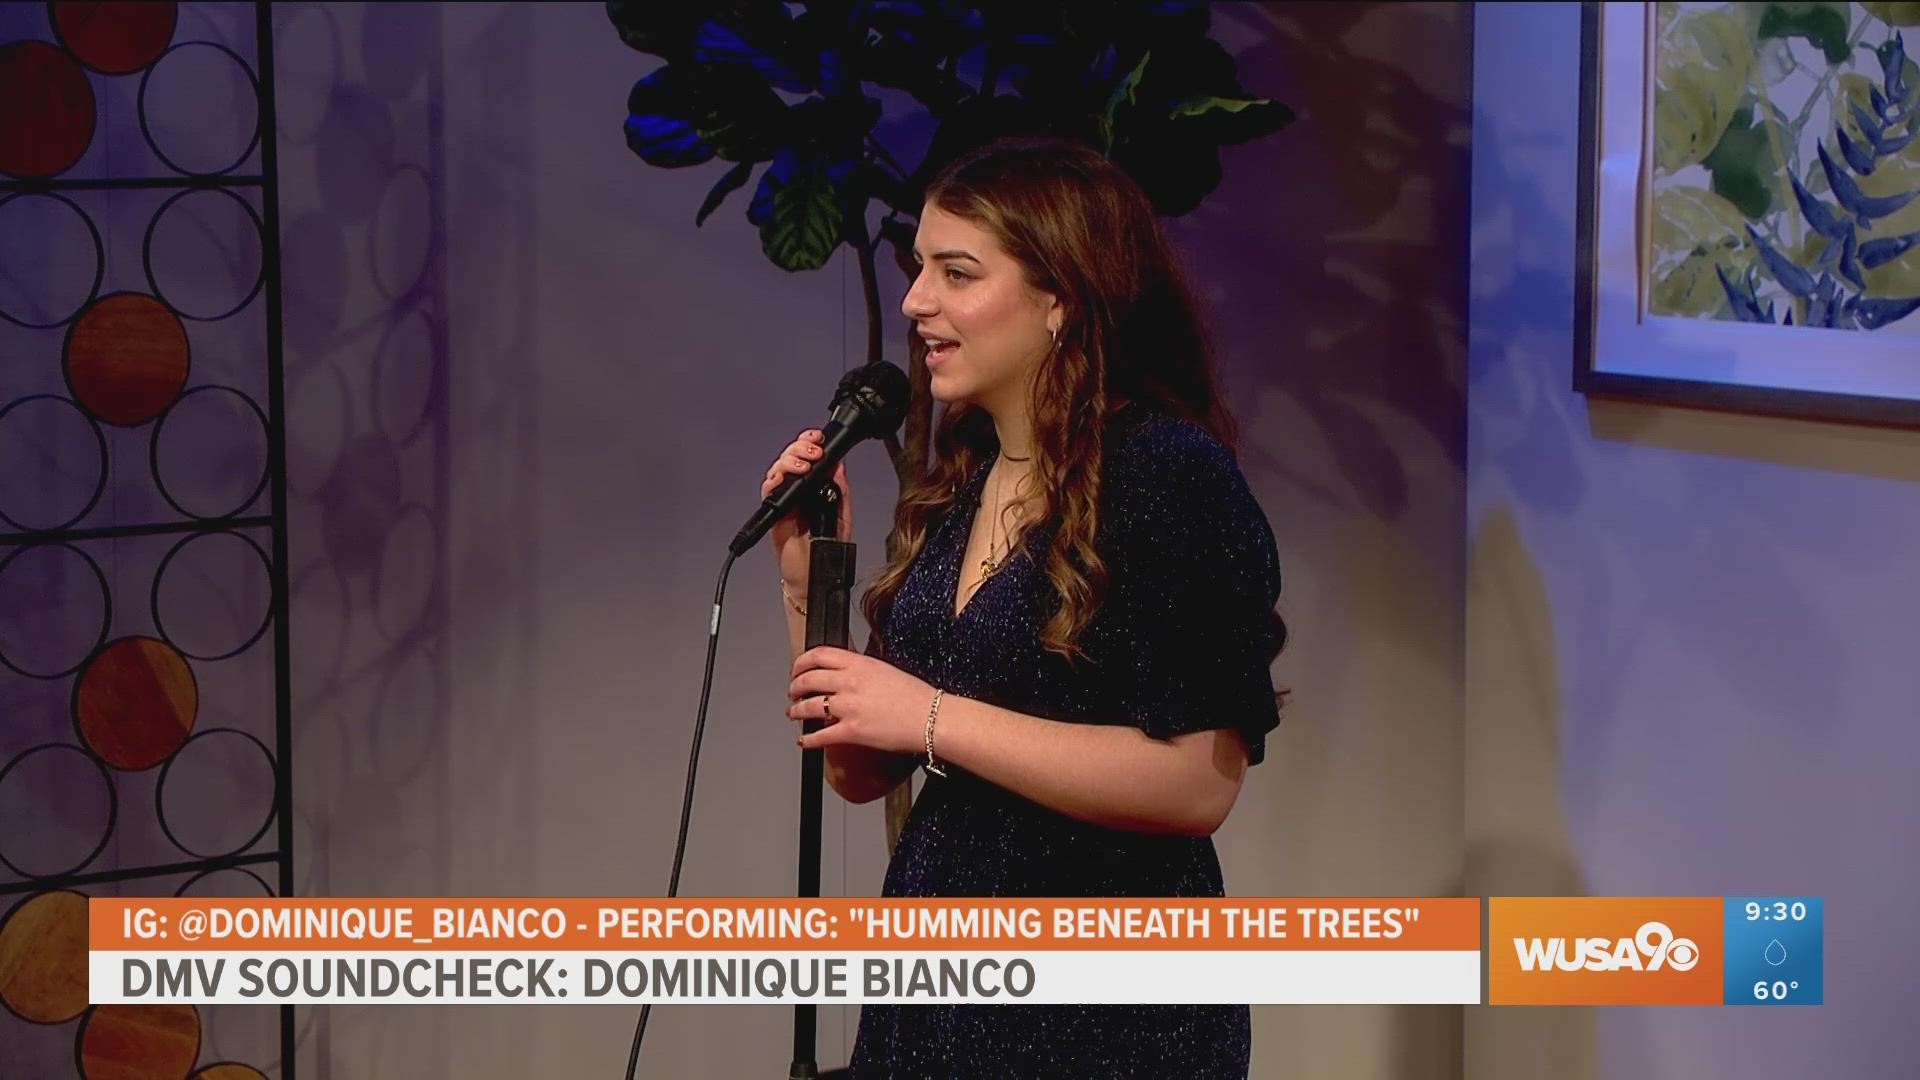 Meet one of the finalists of this year's WAMMIE Awards, Jazz Vocalist Dominique Bianco. In today's DMV Soundcheck, she's performing 'Humming Beneath the Trees.'